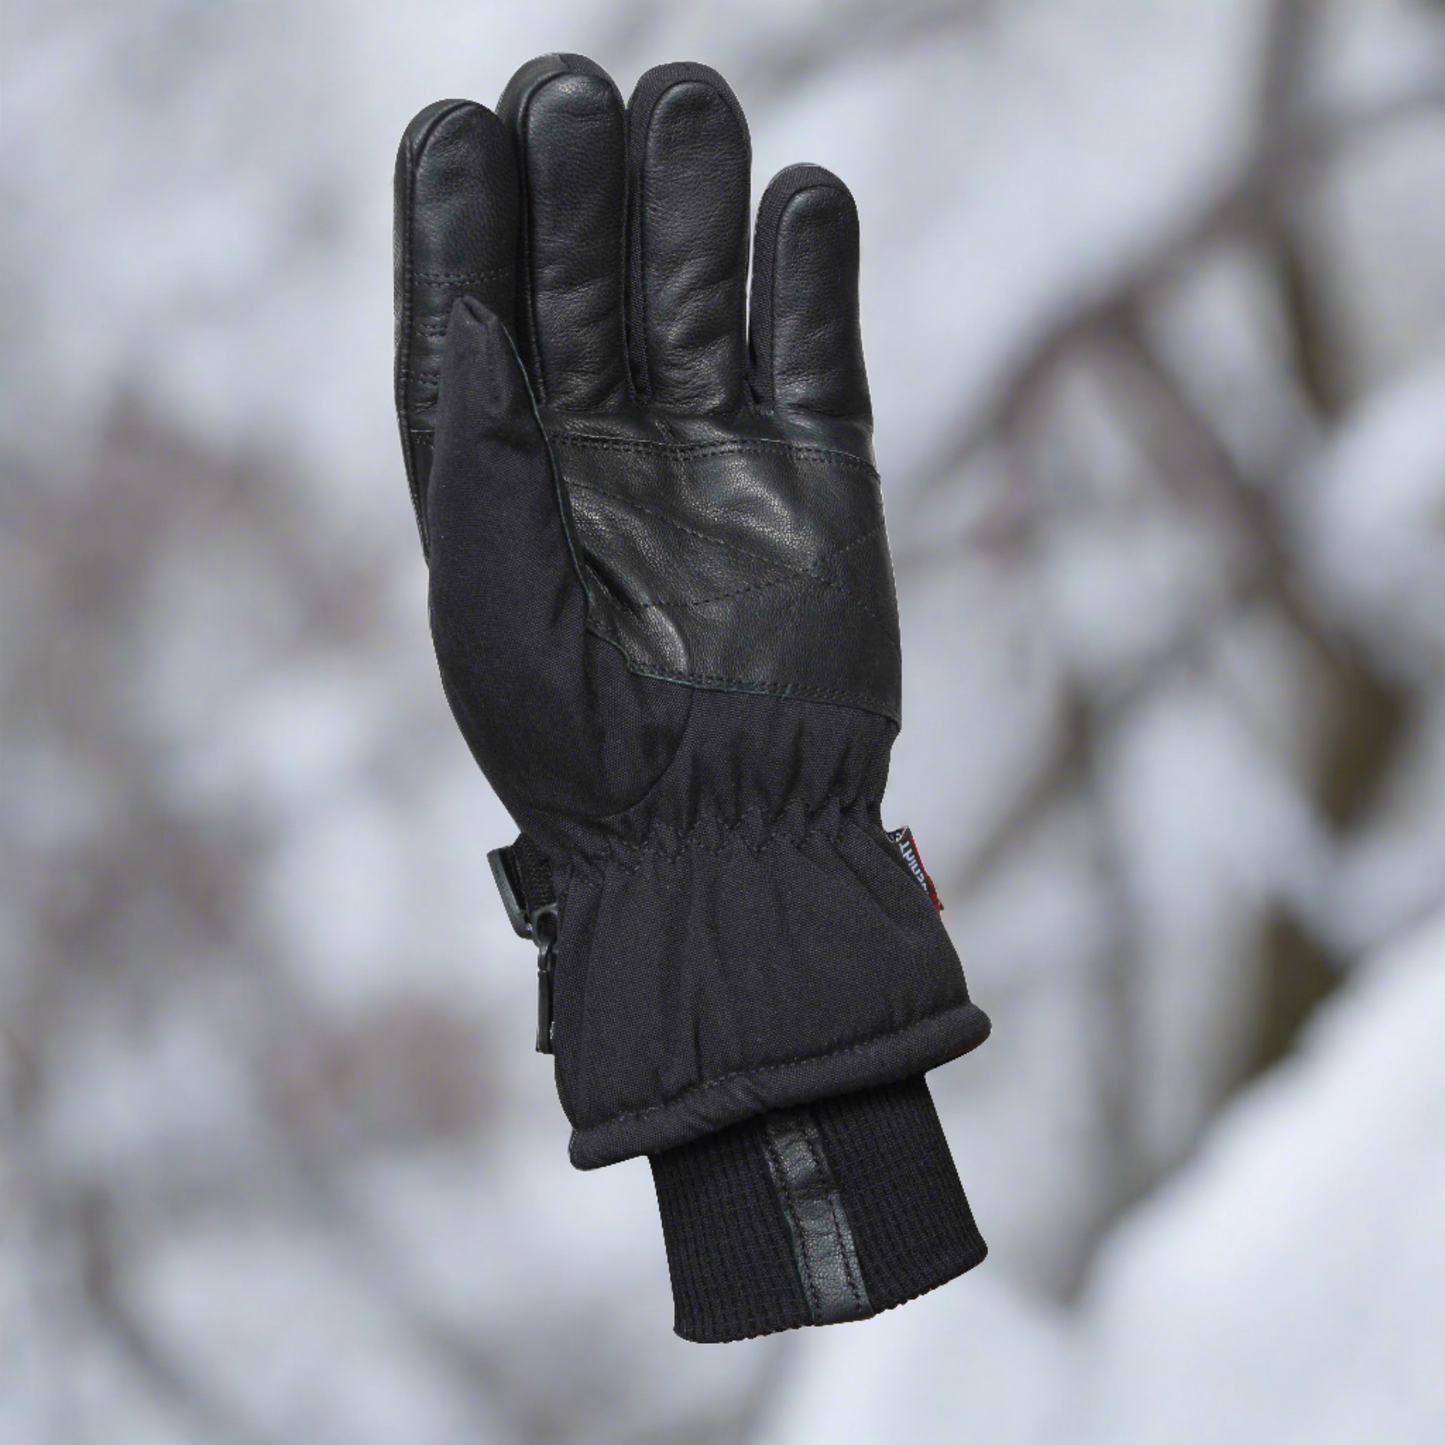 Rothco Cold Weather Insulated Gloves